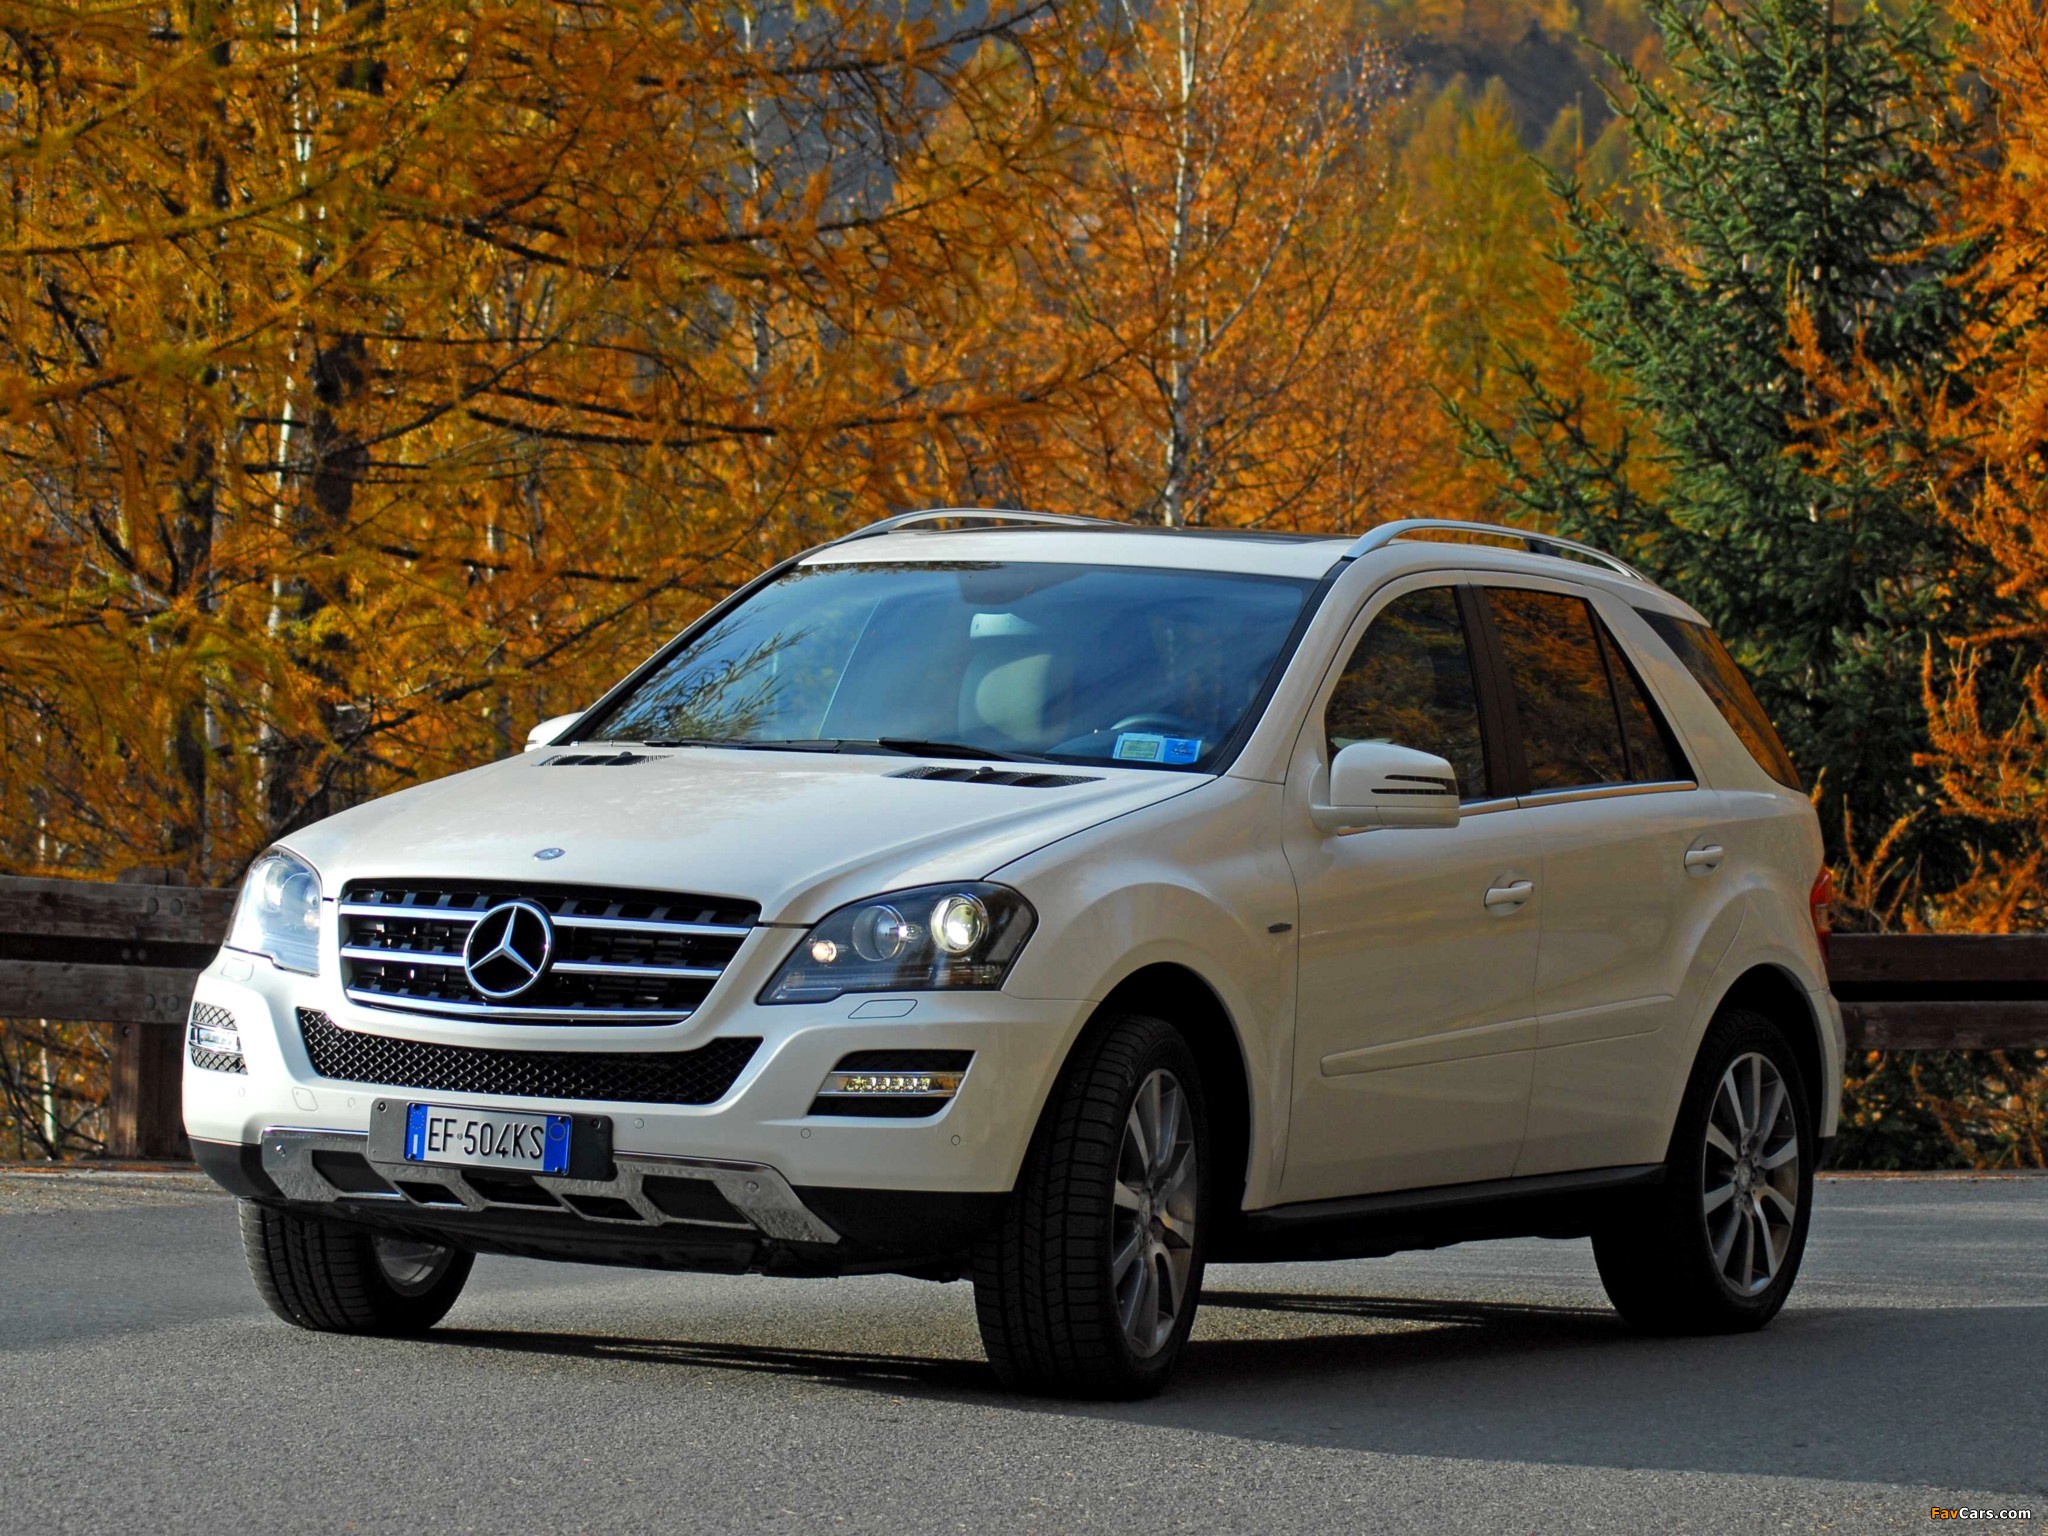 File:Mercedes ML 350 CDI 4MATIC (W164) Facelift front 20100913.jpg -  Wikimedia Commons